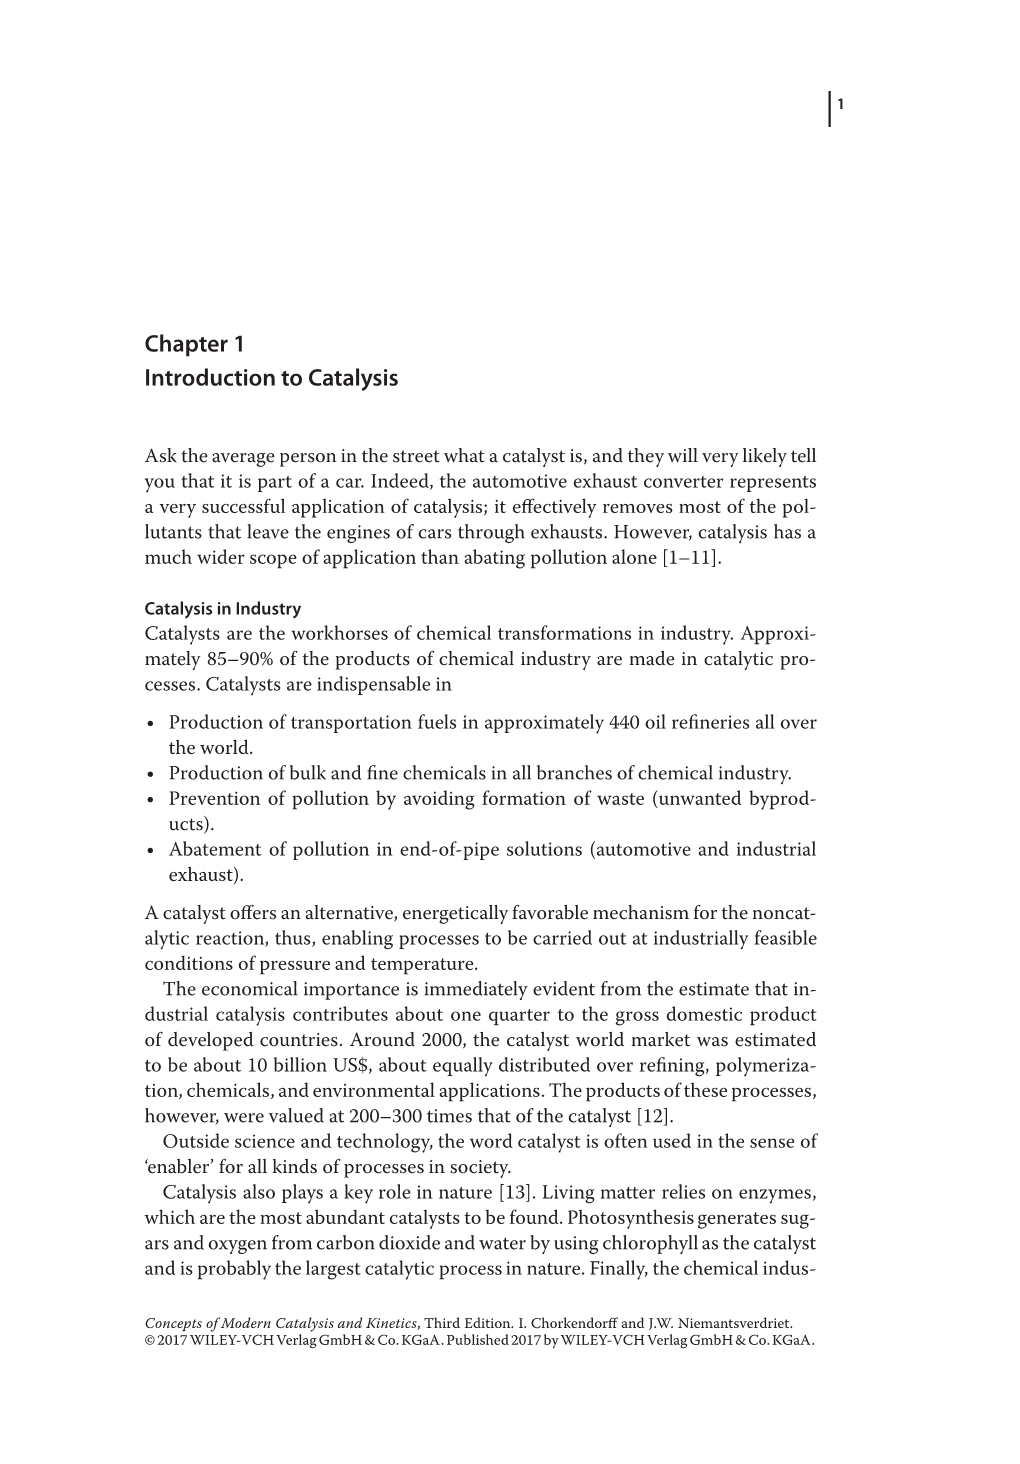 Chapter 1 Introduction to Catalysis